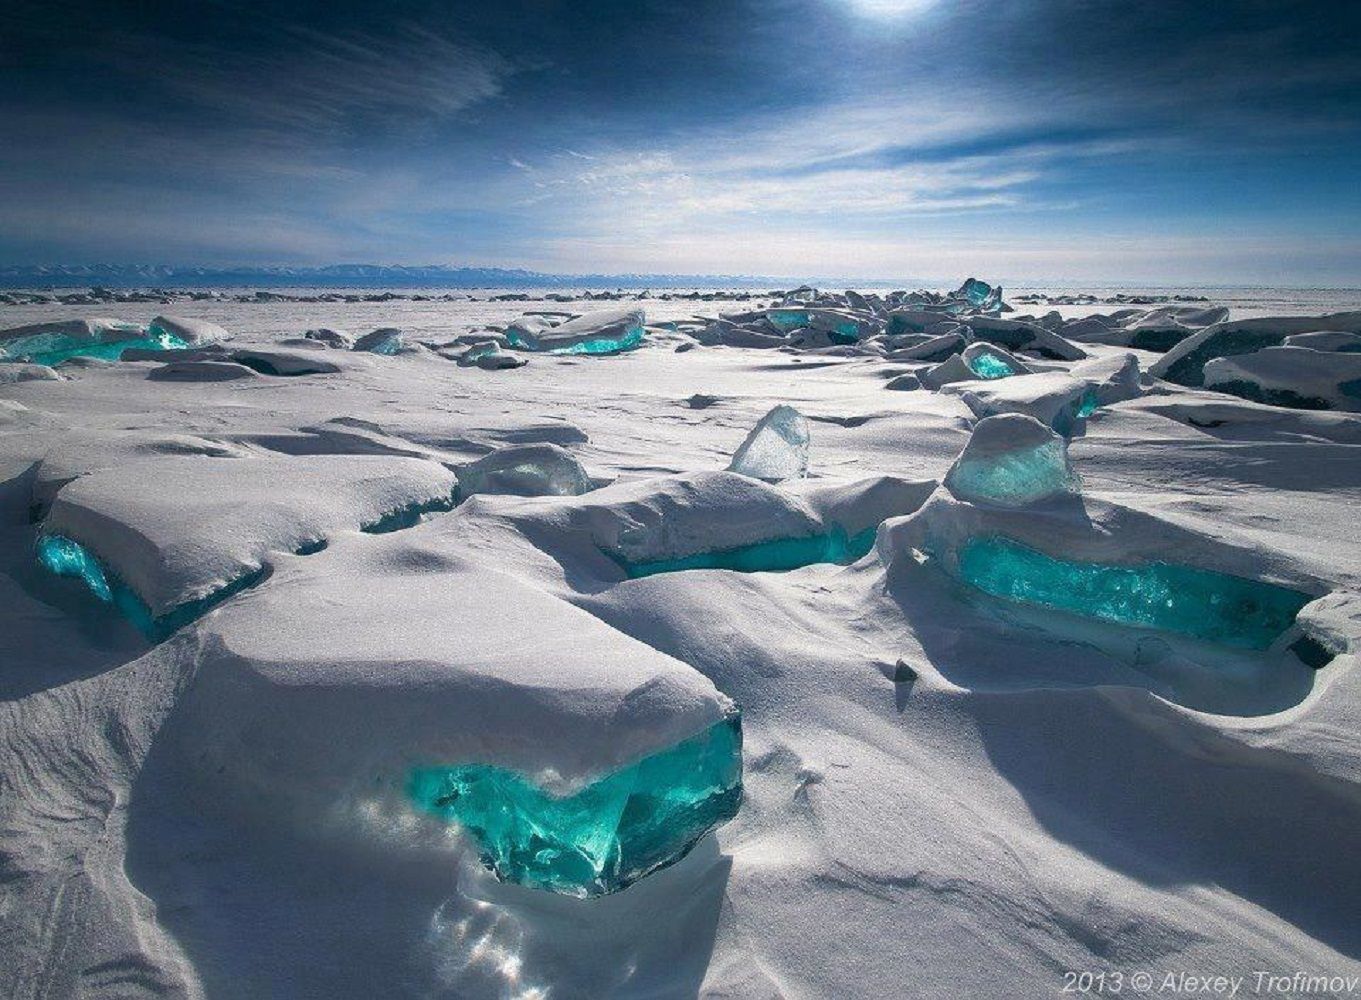 A large field of ice with blue chunks - Ice